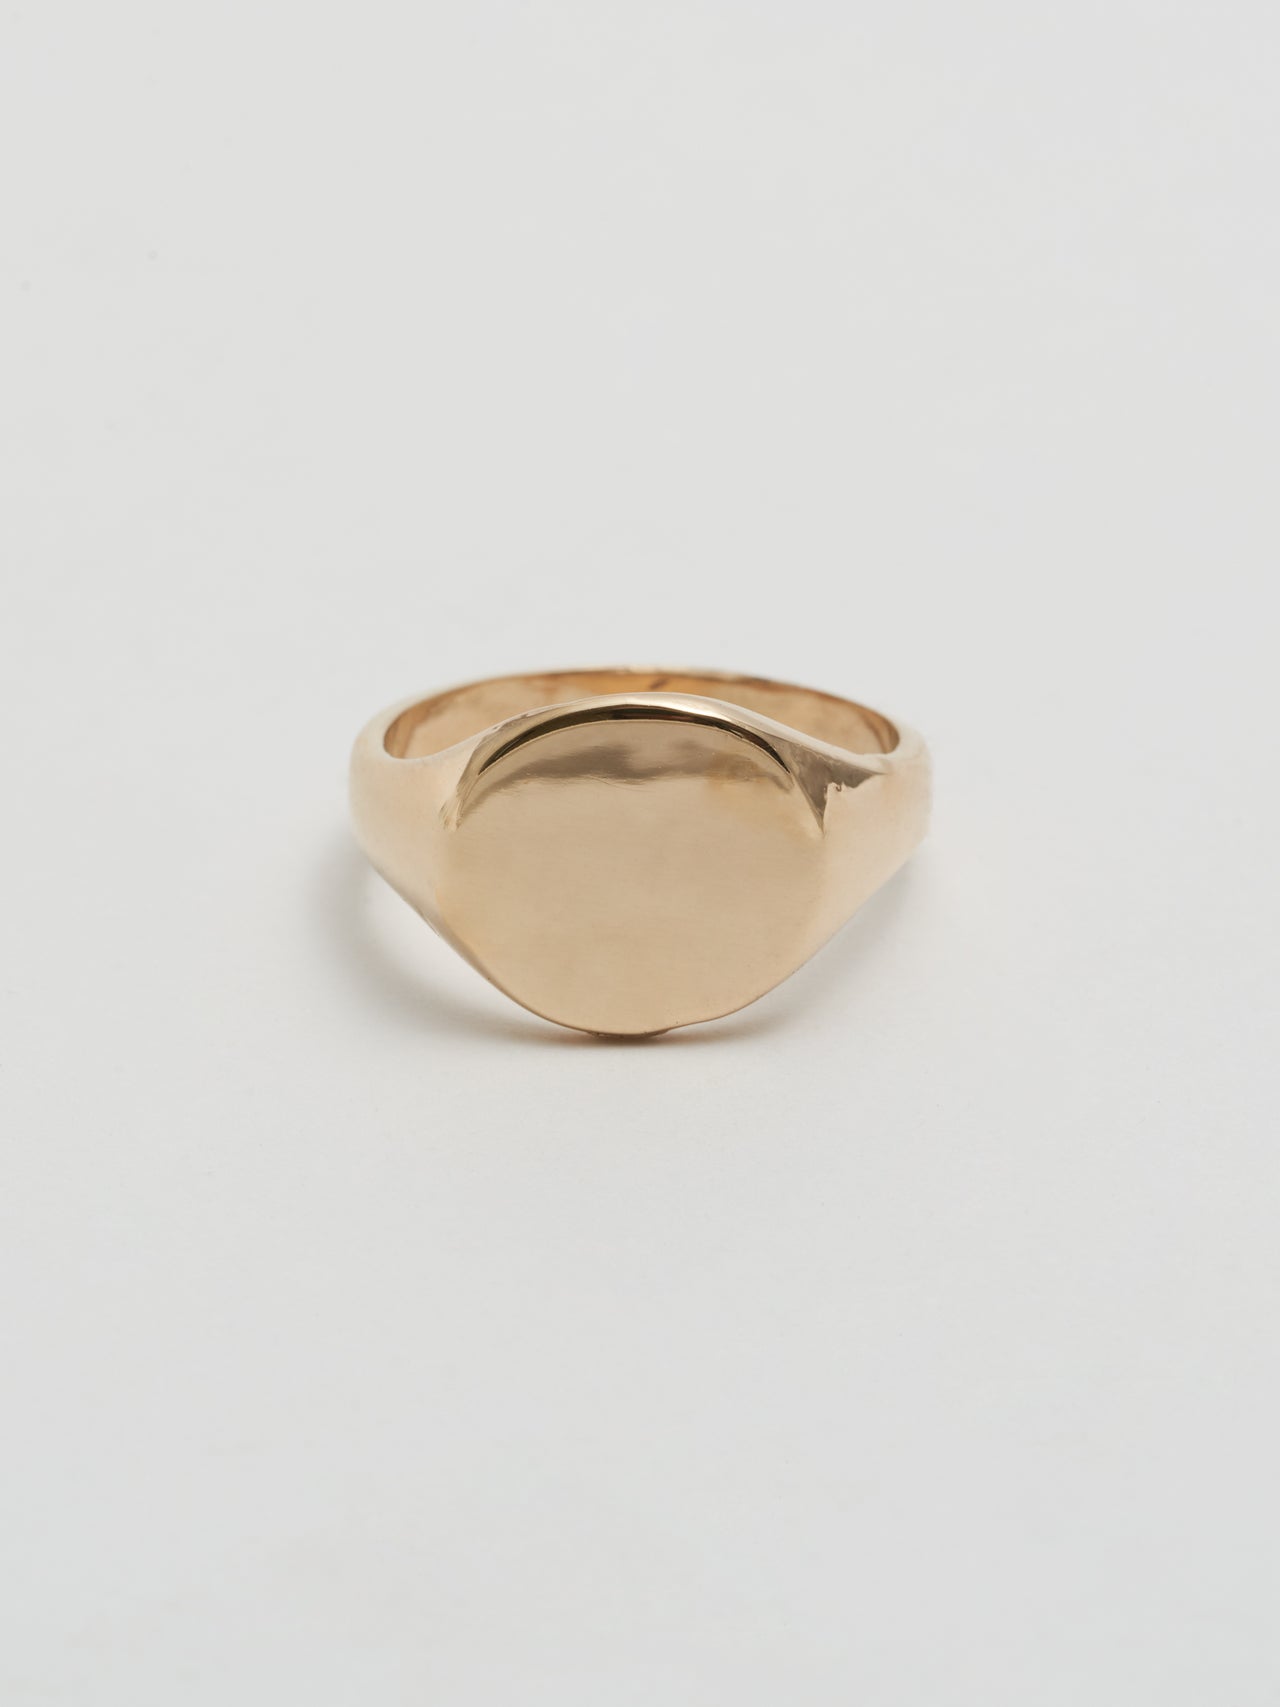 Baby Signet Ring: 14Kt Yellow Gold Signet Ring ID Signet  with a 10mm Diameter